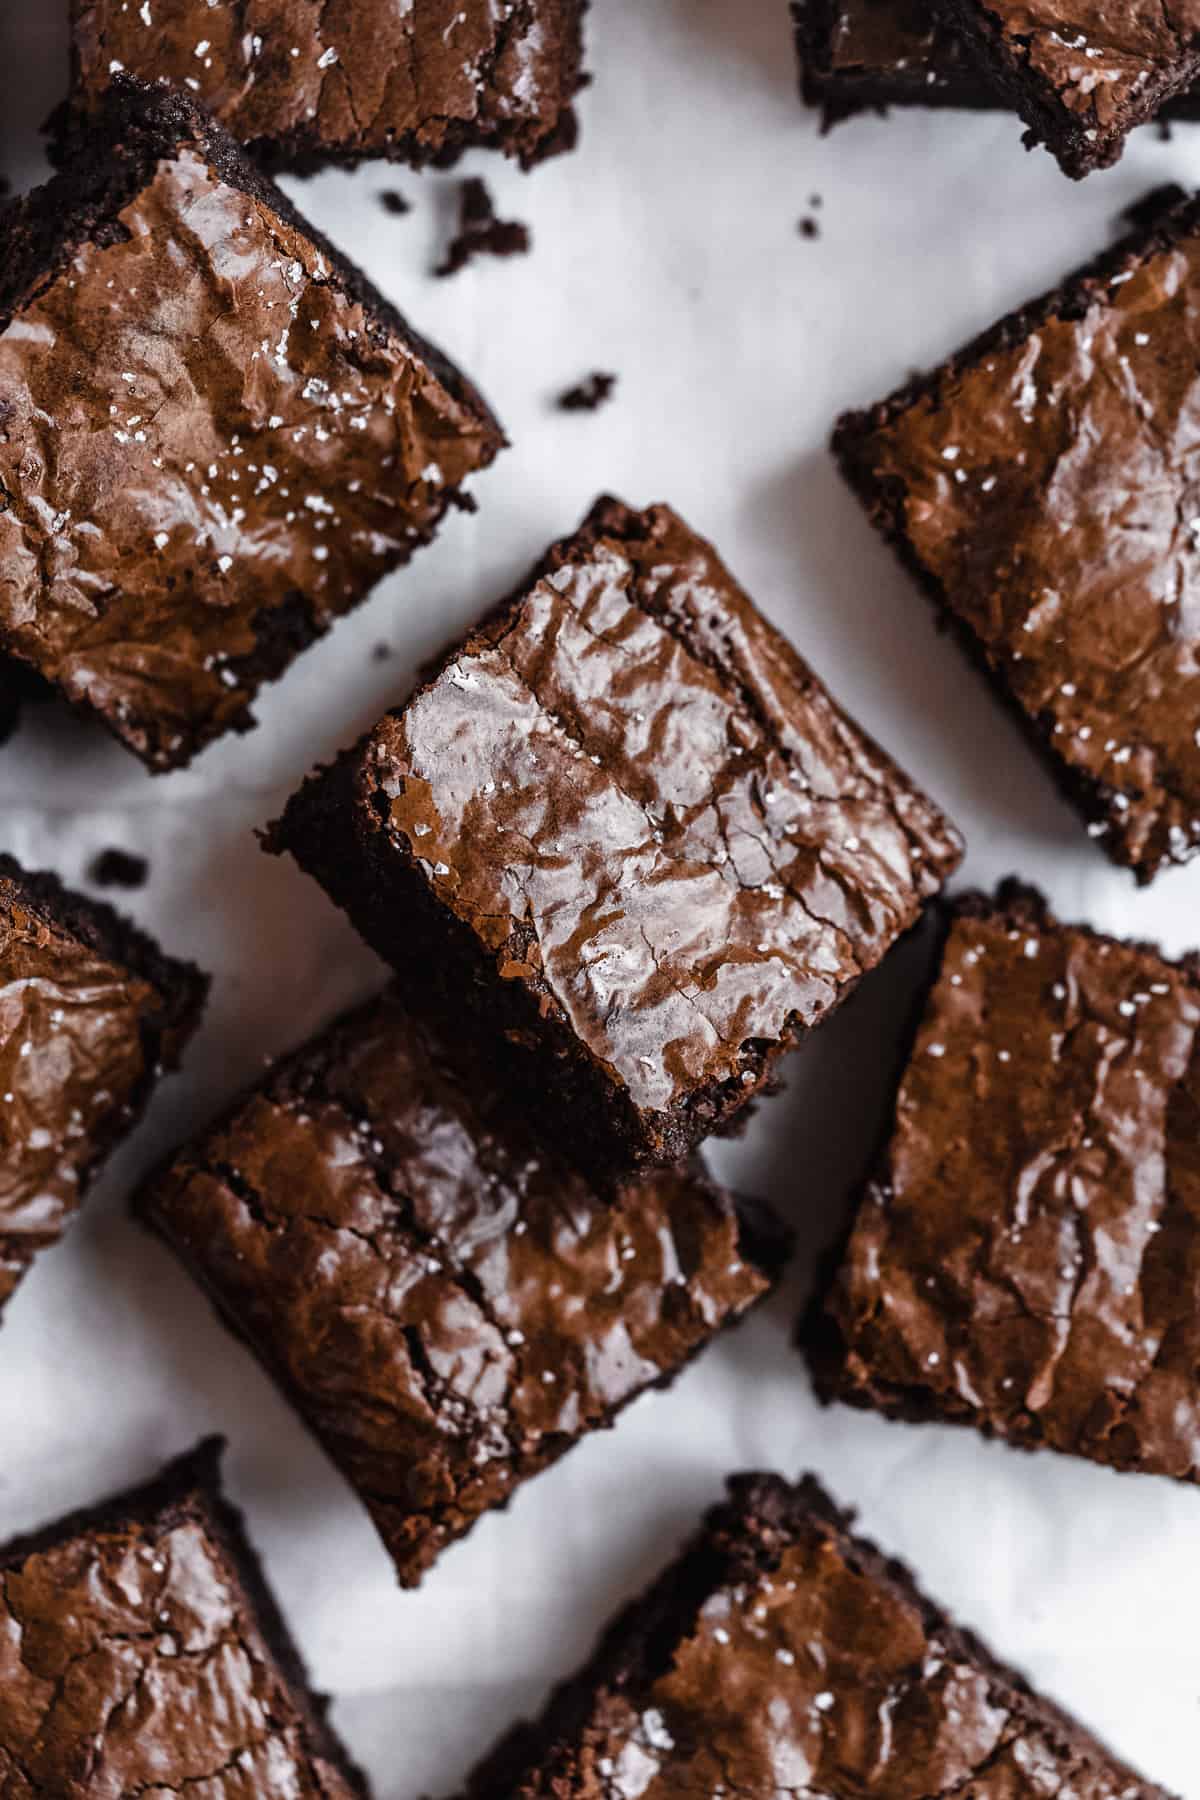 Chocolate almond flour brownies scattered on white parchment paper.